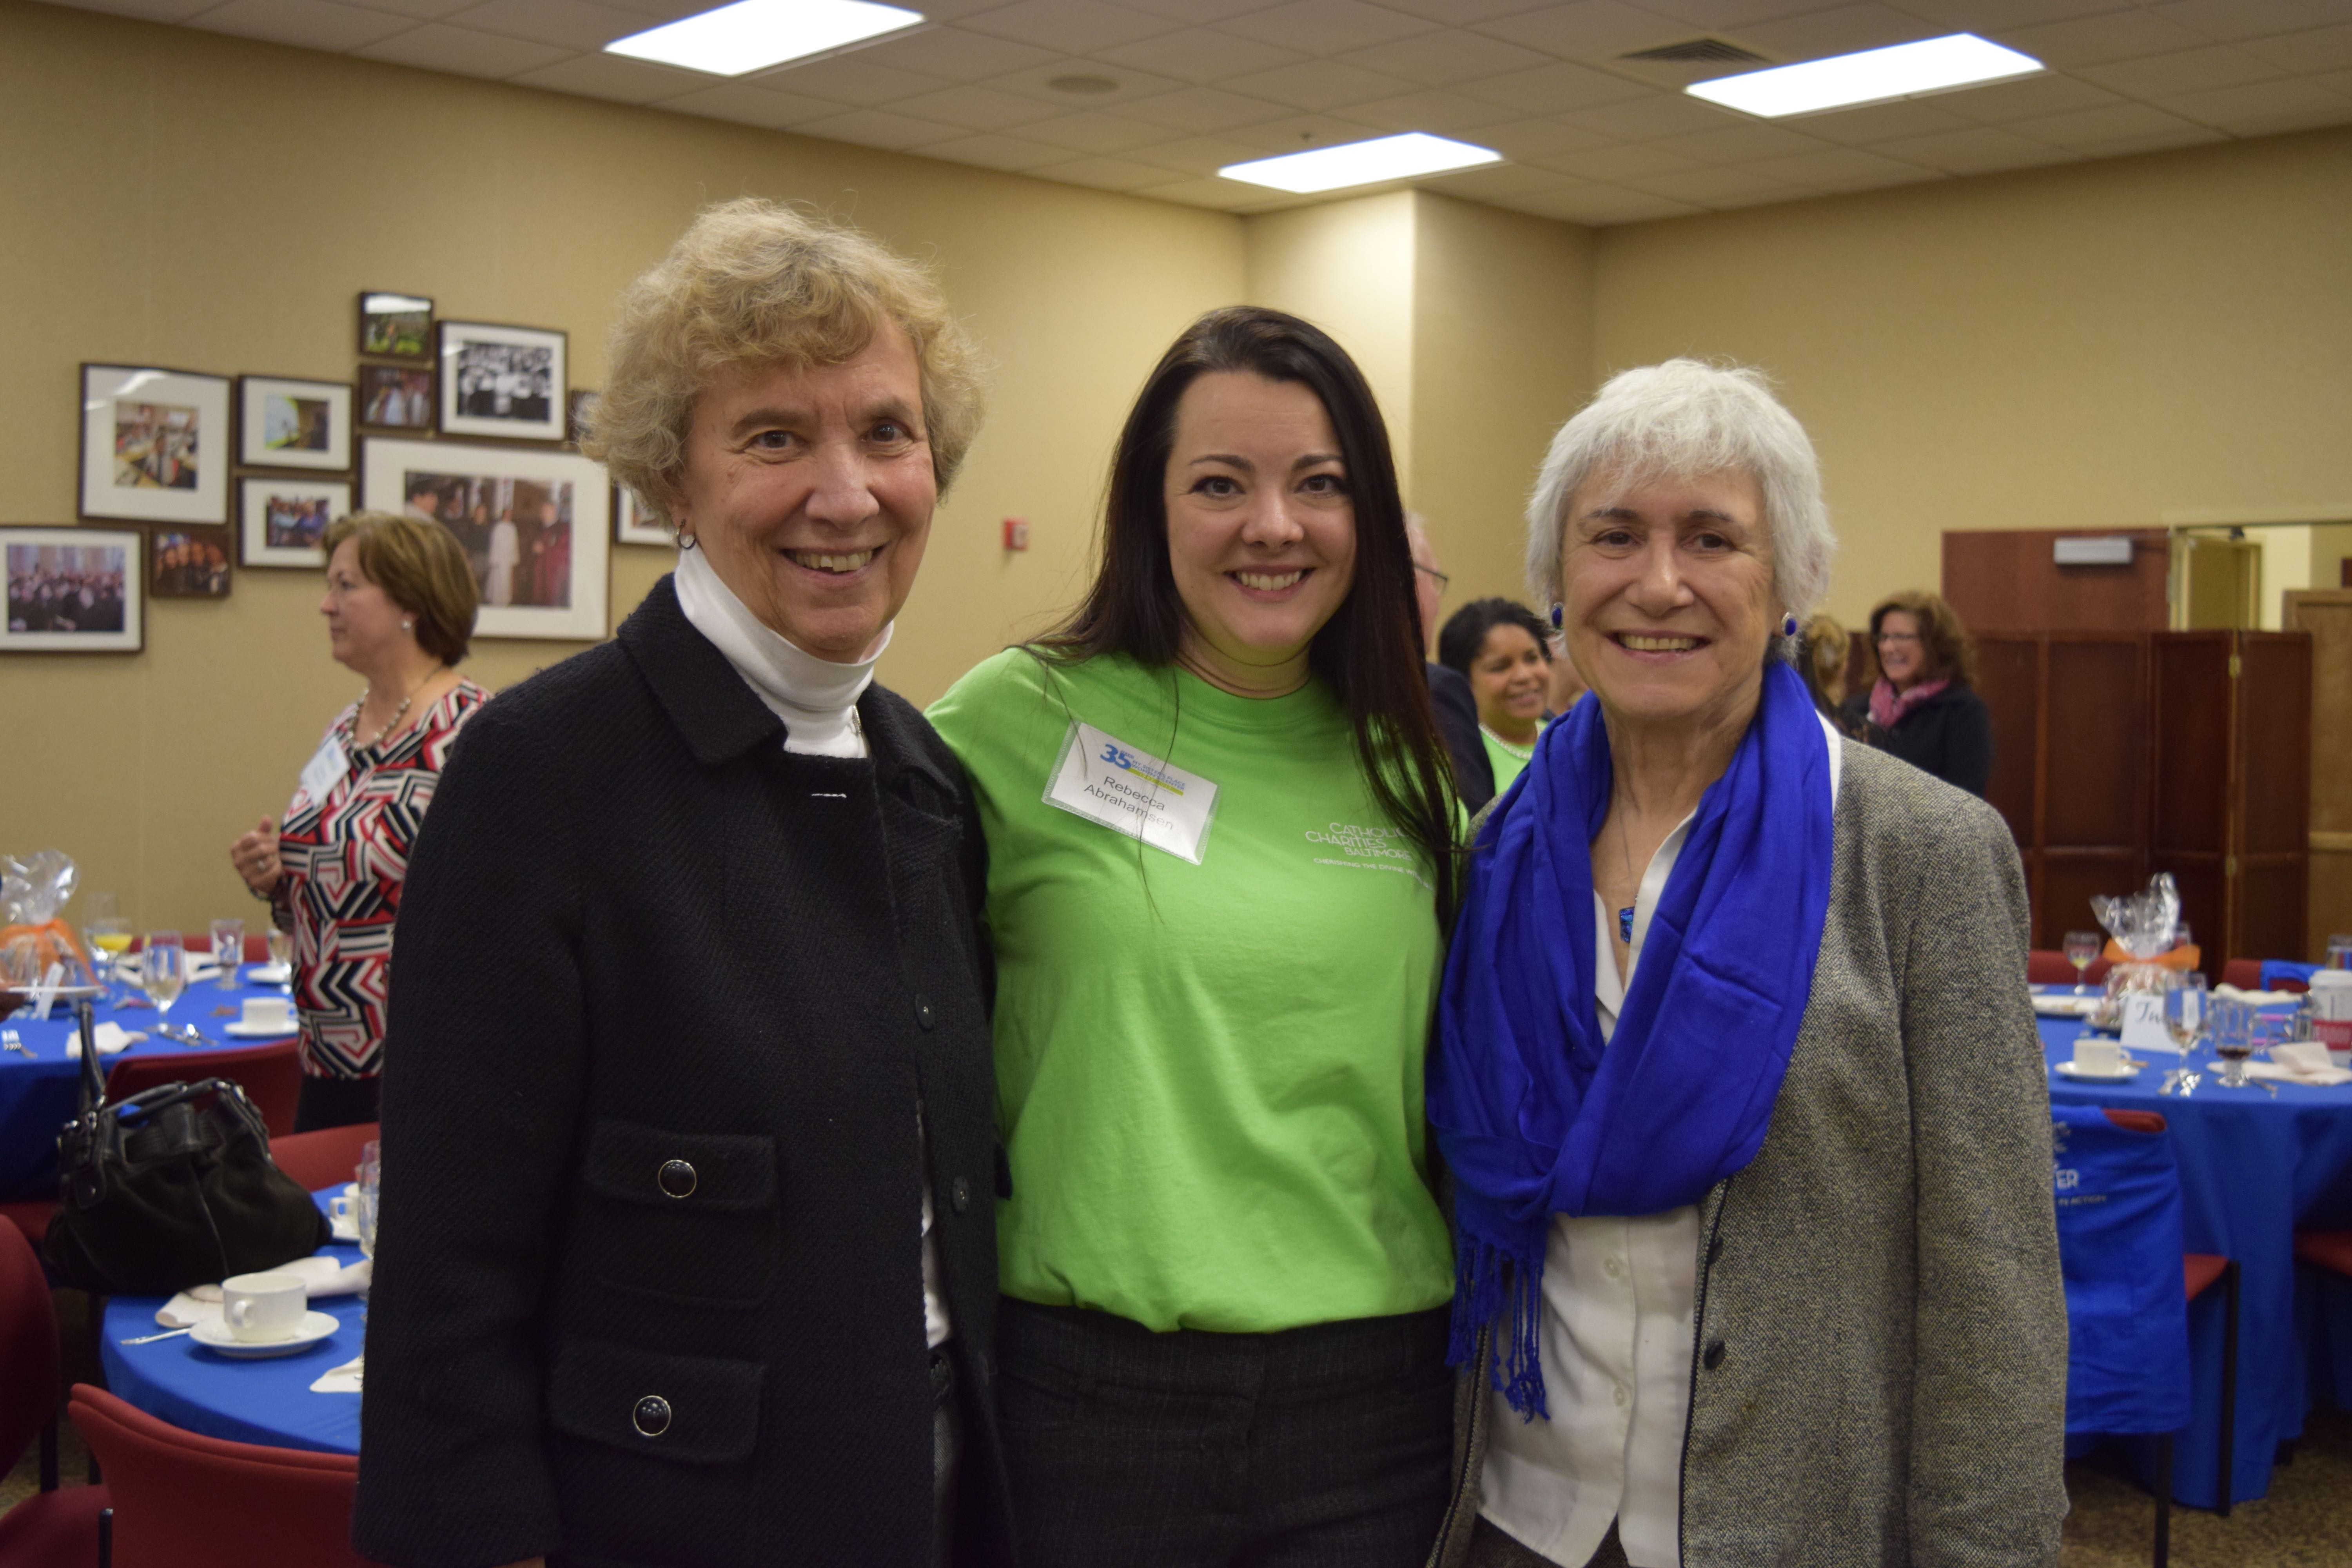 MSPWC’s former and present directors including (l-r) Sr. Patricia McLaughlin, SSND, the first director of the Center when it opened in 1982 and current Director of the Caroline Center; Rebecca Abrahamsen, current Program Director; and Mary Ellen Vanni, the second director and retired Executive Director of the Fuel Fund of Maryland.